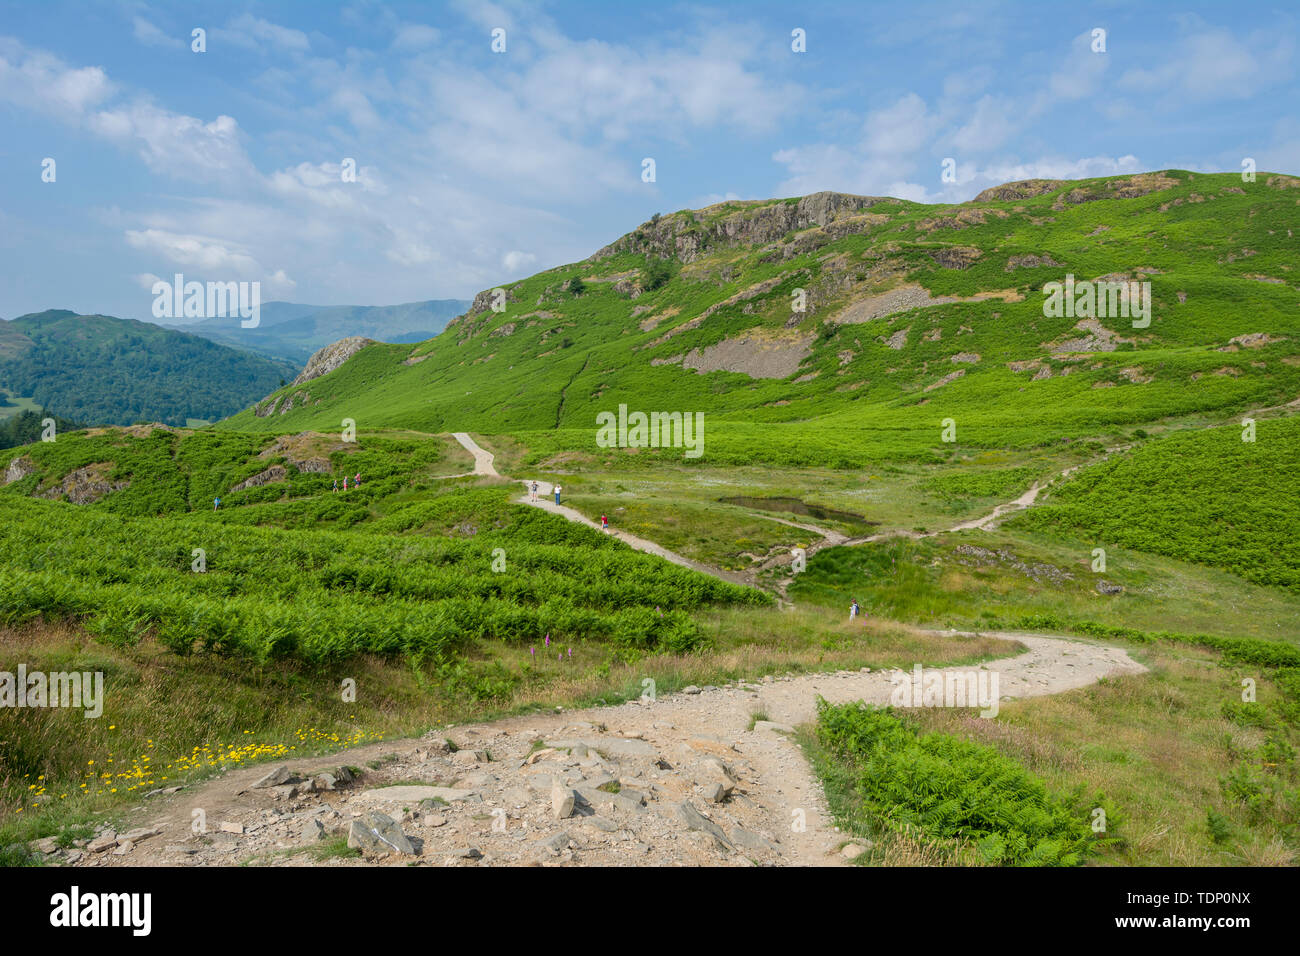 Loughrigg Fell in the Lake District National Park, Cumbria, England. Stock Photo